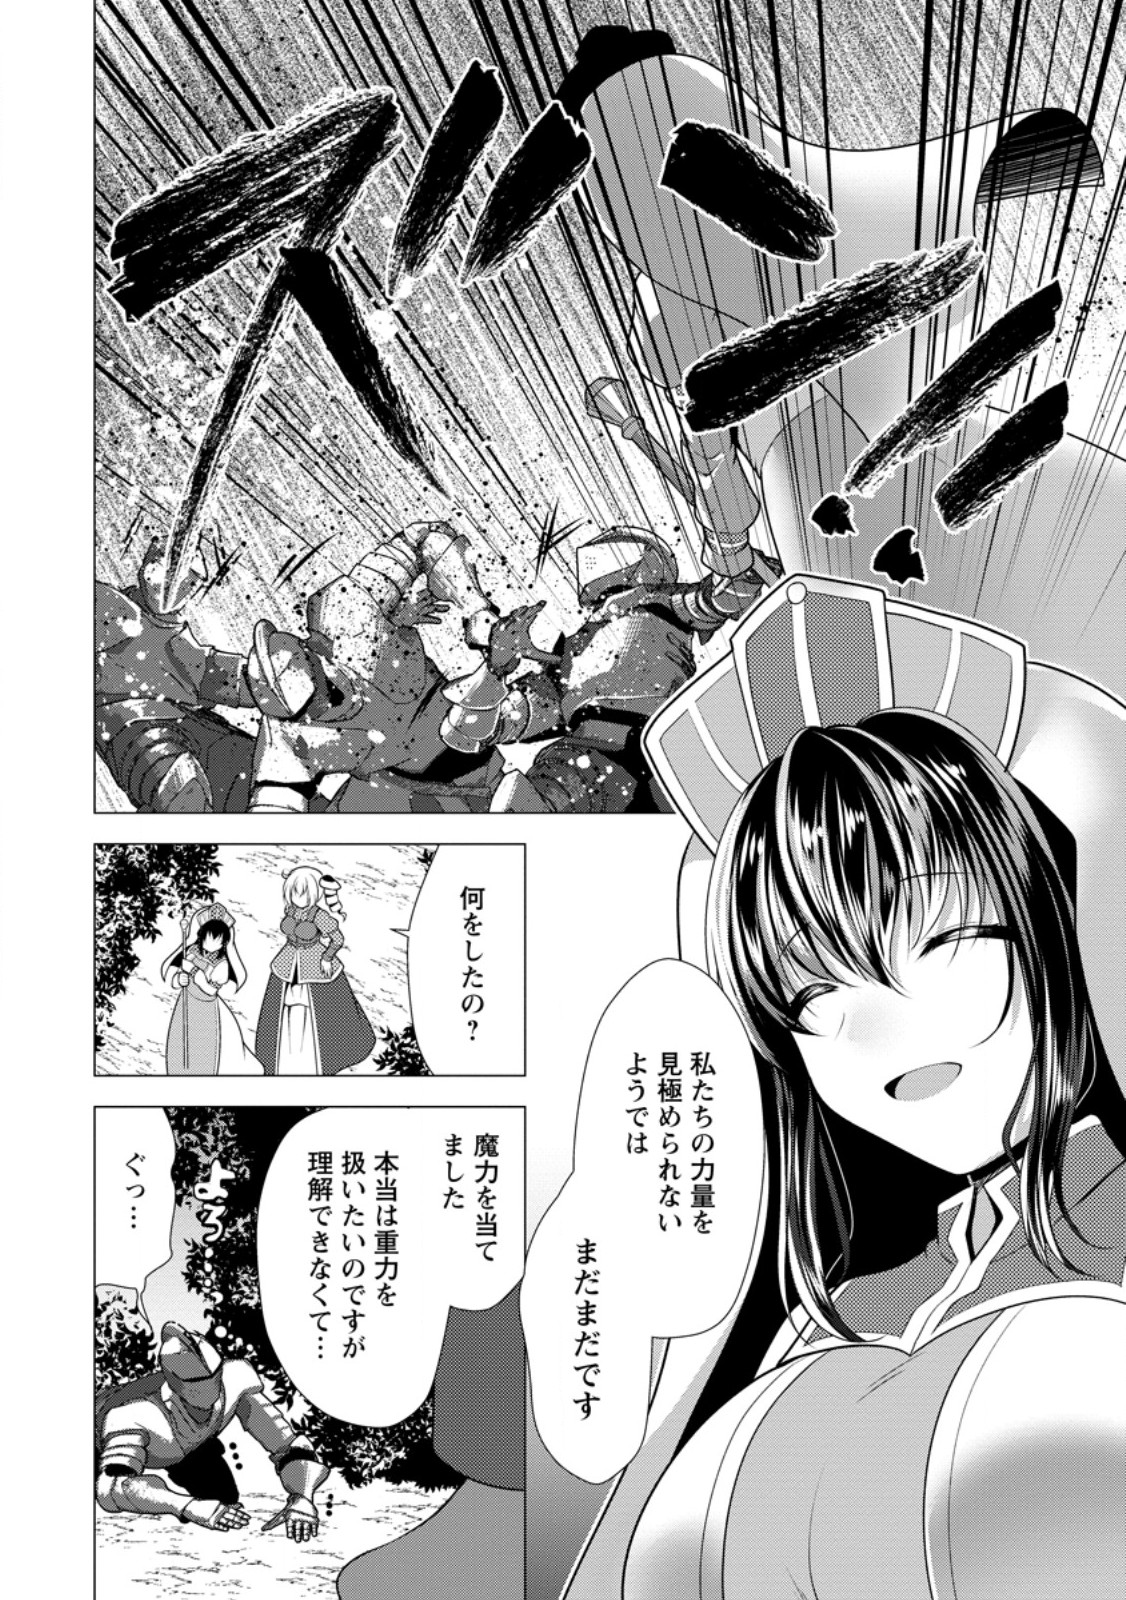 Hisshou Dungeon Unei Houhou - Chapter 61.1 - Page 2